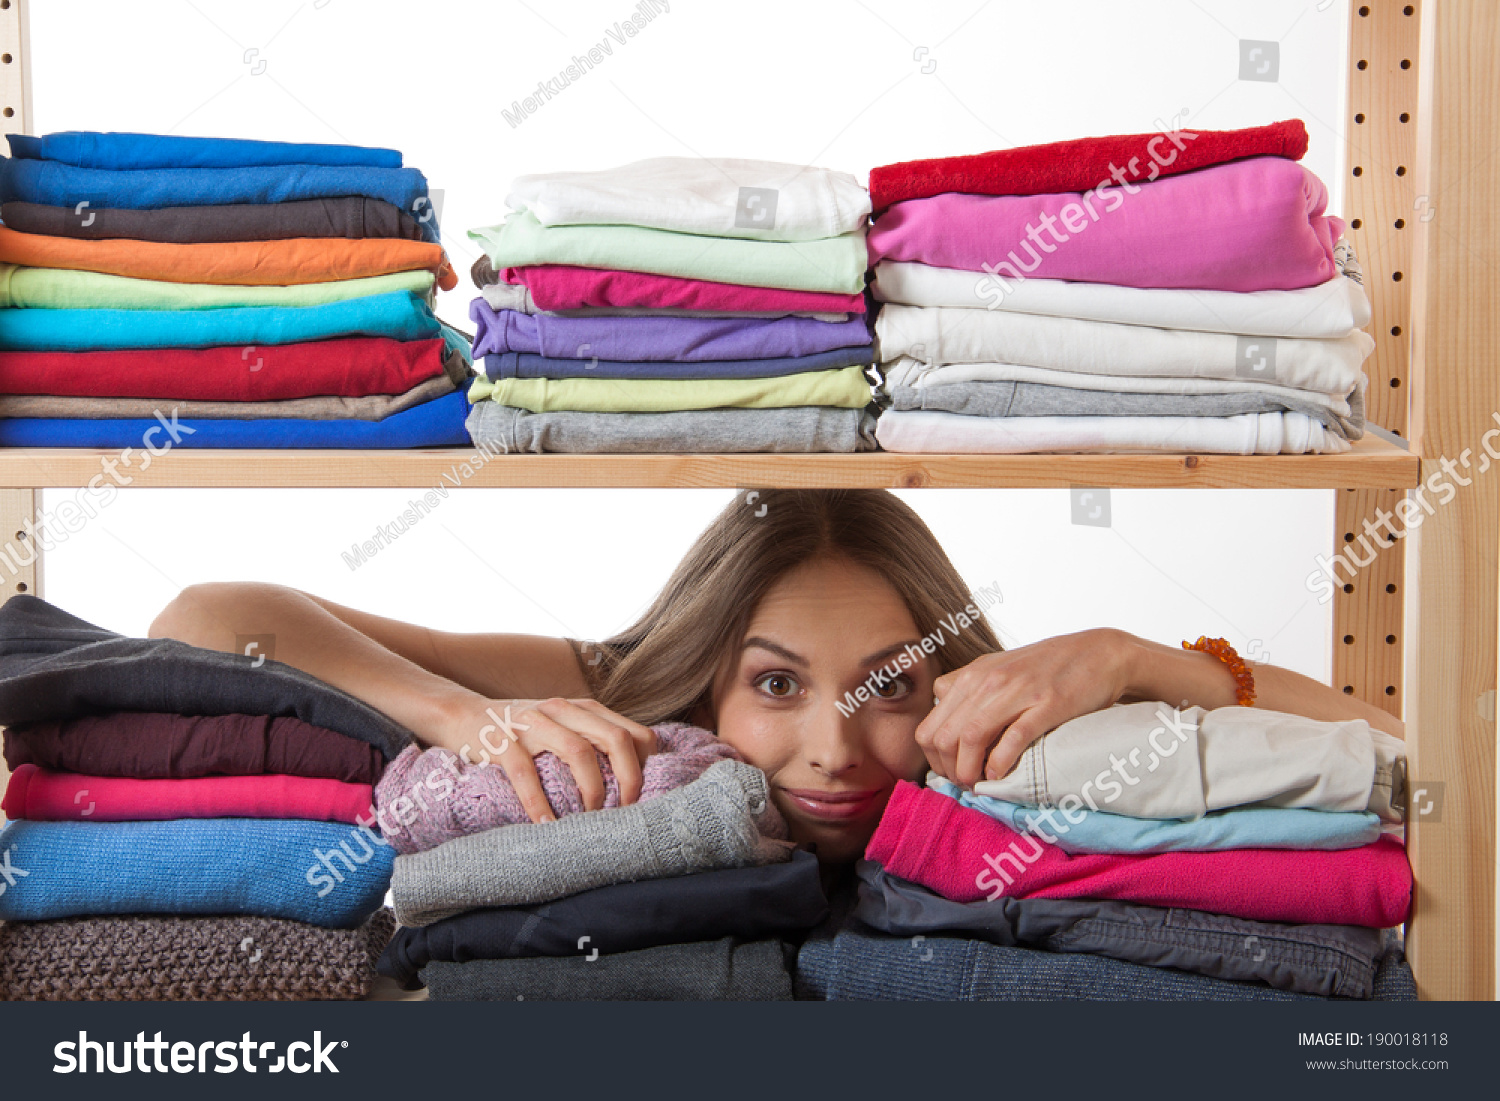 Young Woman Hiding Behind A Shelf With Clothing, Isolated On White ...